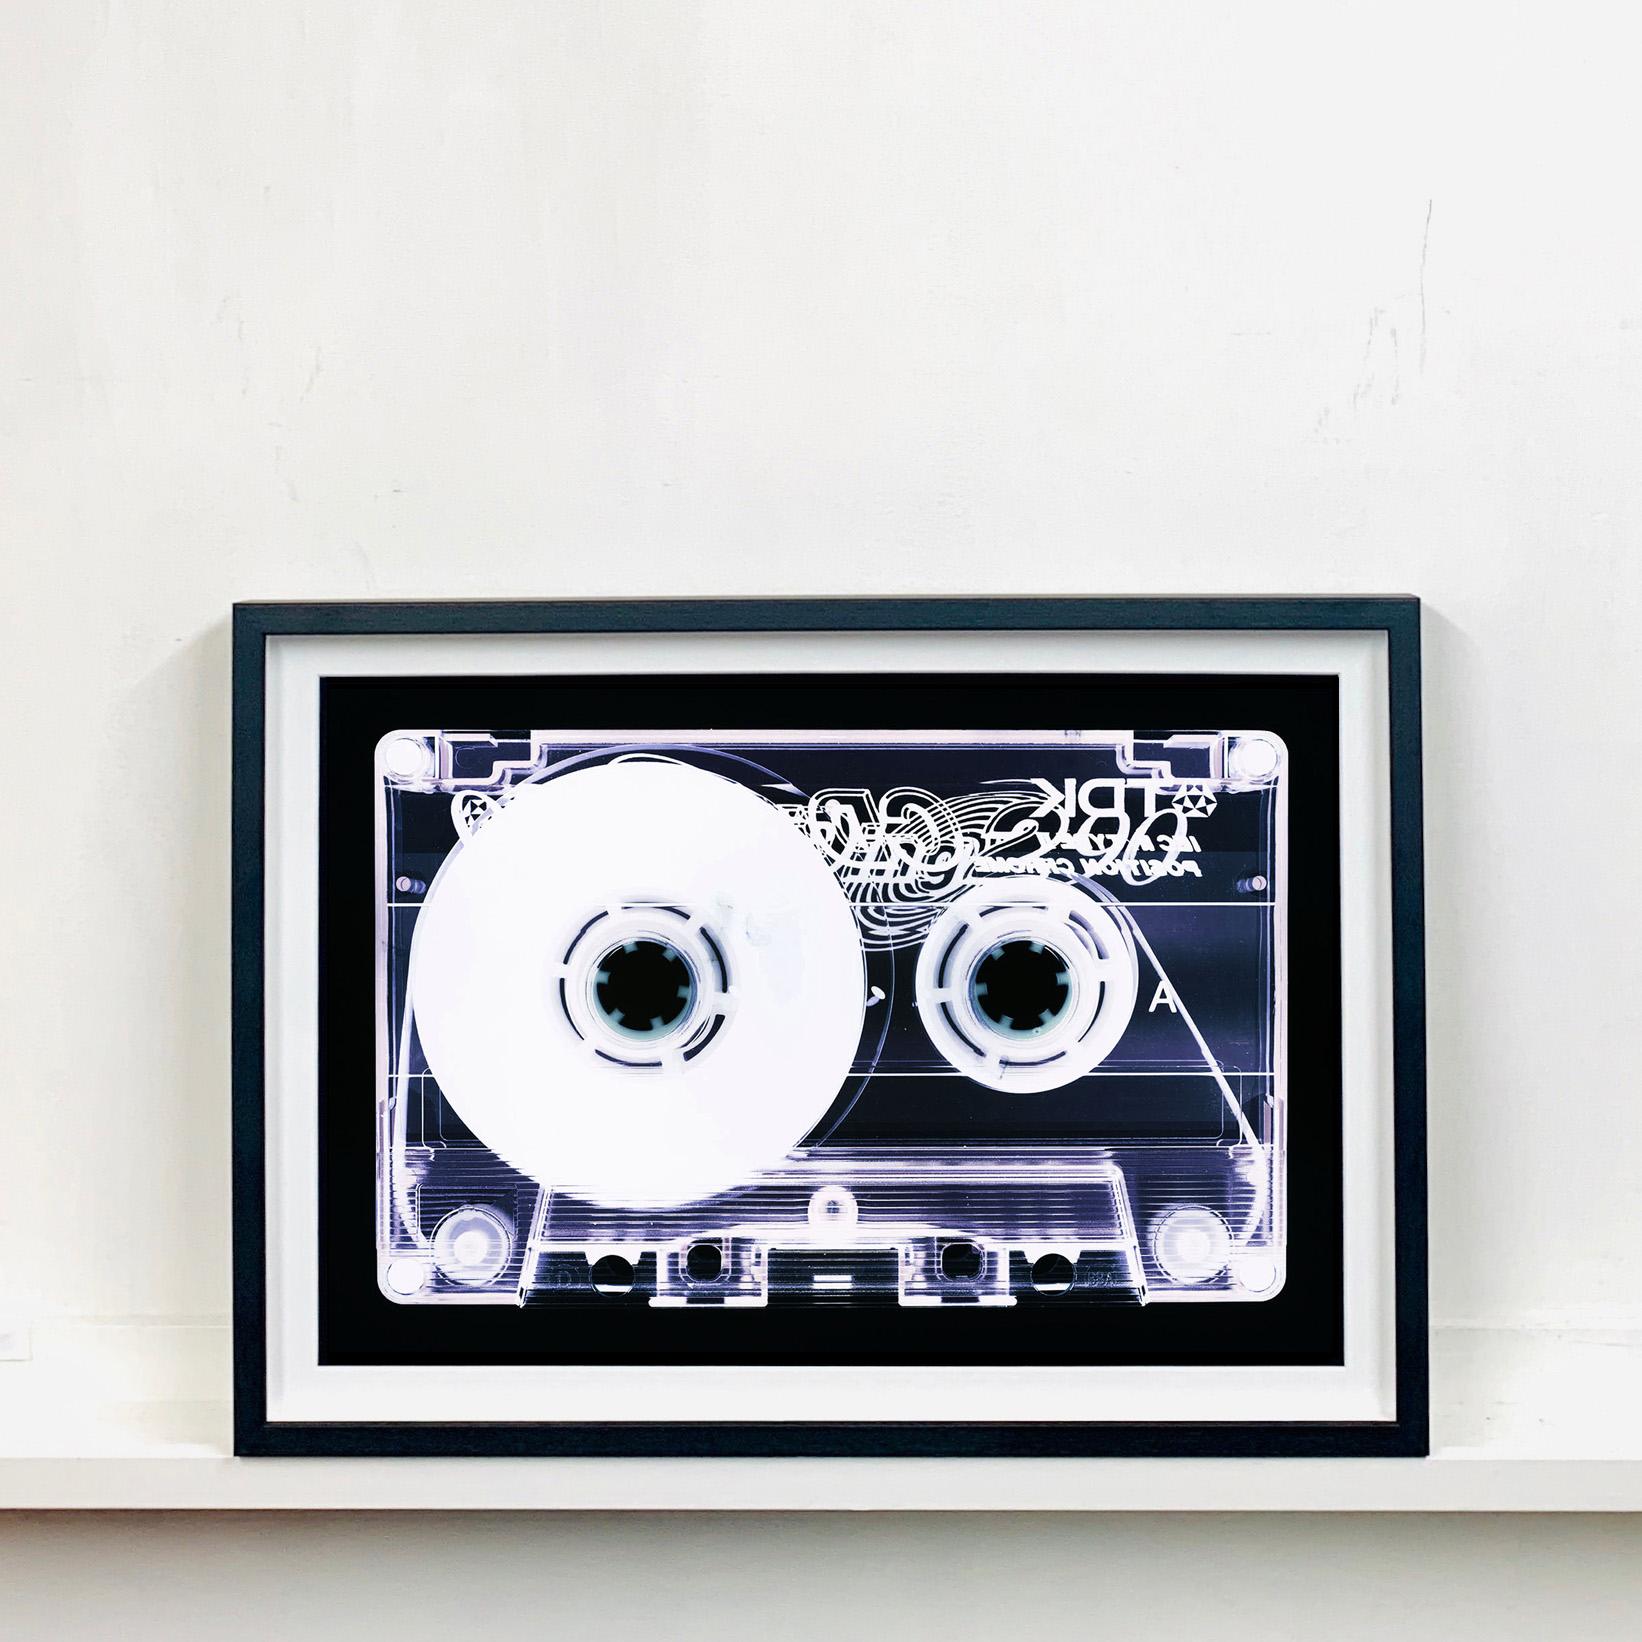 Tape Collection, Blank Tape Side A - Contemporary Pop Art Color Photography - Black Print by Heidler & Heeps